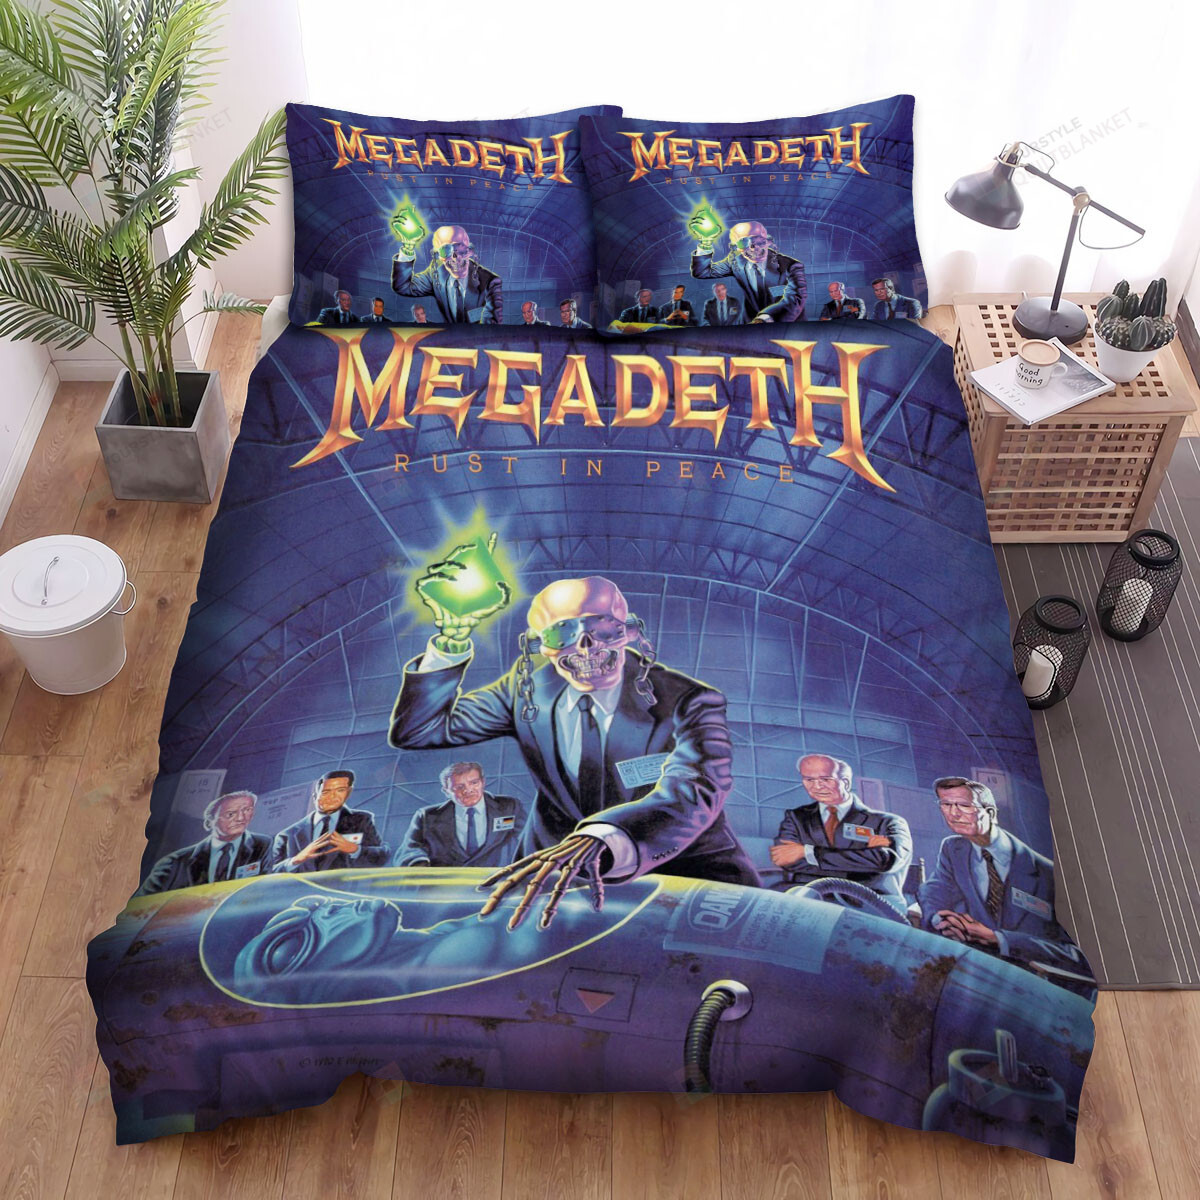 Megadeth Rust In Peace Cover Bed Sheets Spread Duvet Cover Bedding Sets